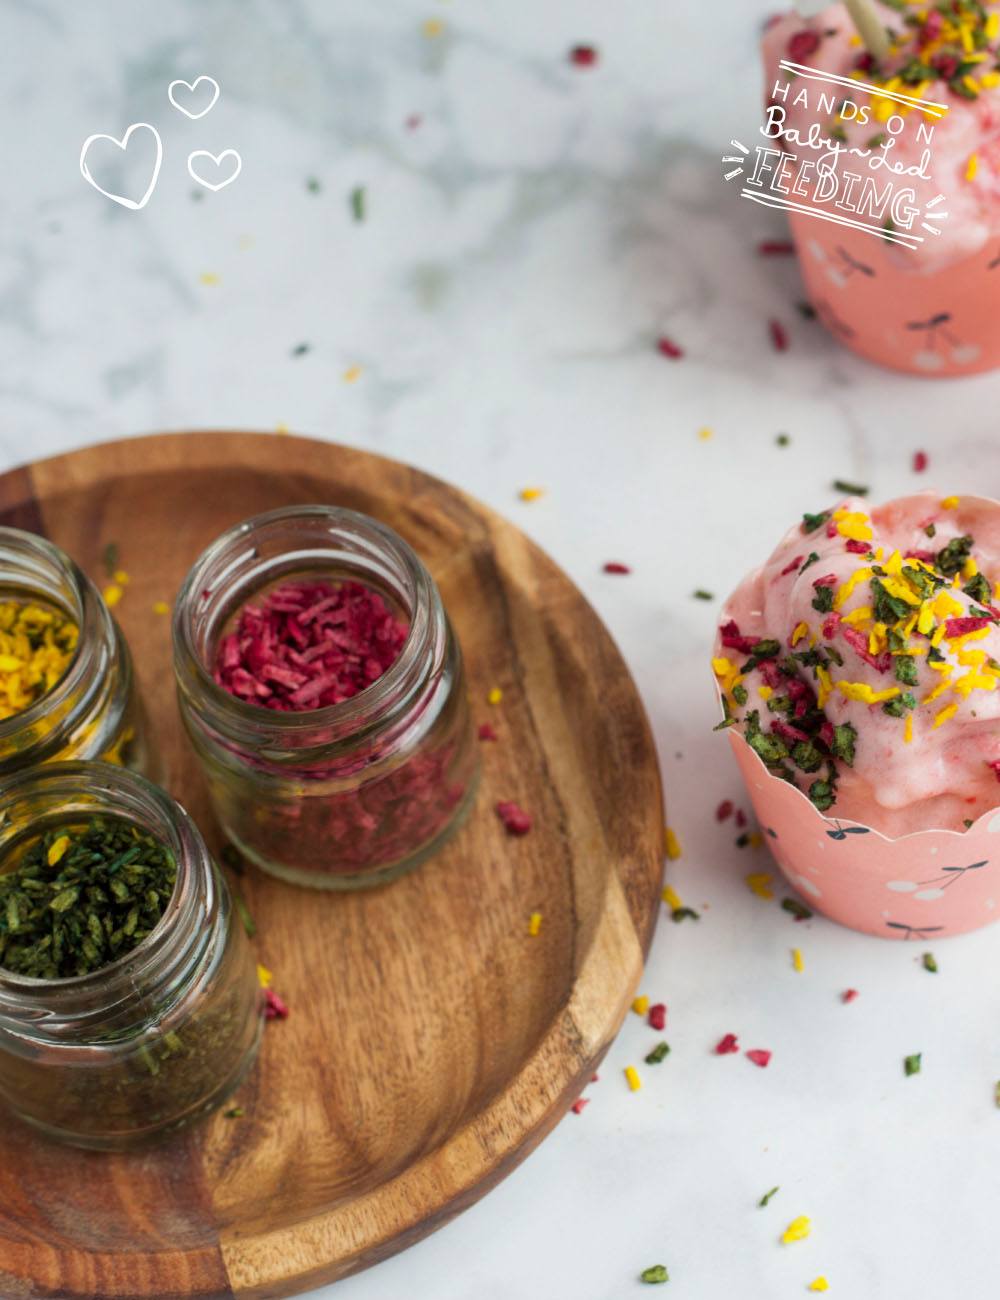 Super Healthy Sugar Free Sprinkles. Cute for little kids and so healthy and nutritious. Jars of healthy sprinkles, sugar free treats for kids. A perfect healthy treat for kids on a summers day. Easy to make and so nutritious, refined sugar free treat packed with goodness.